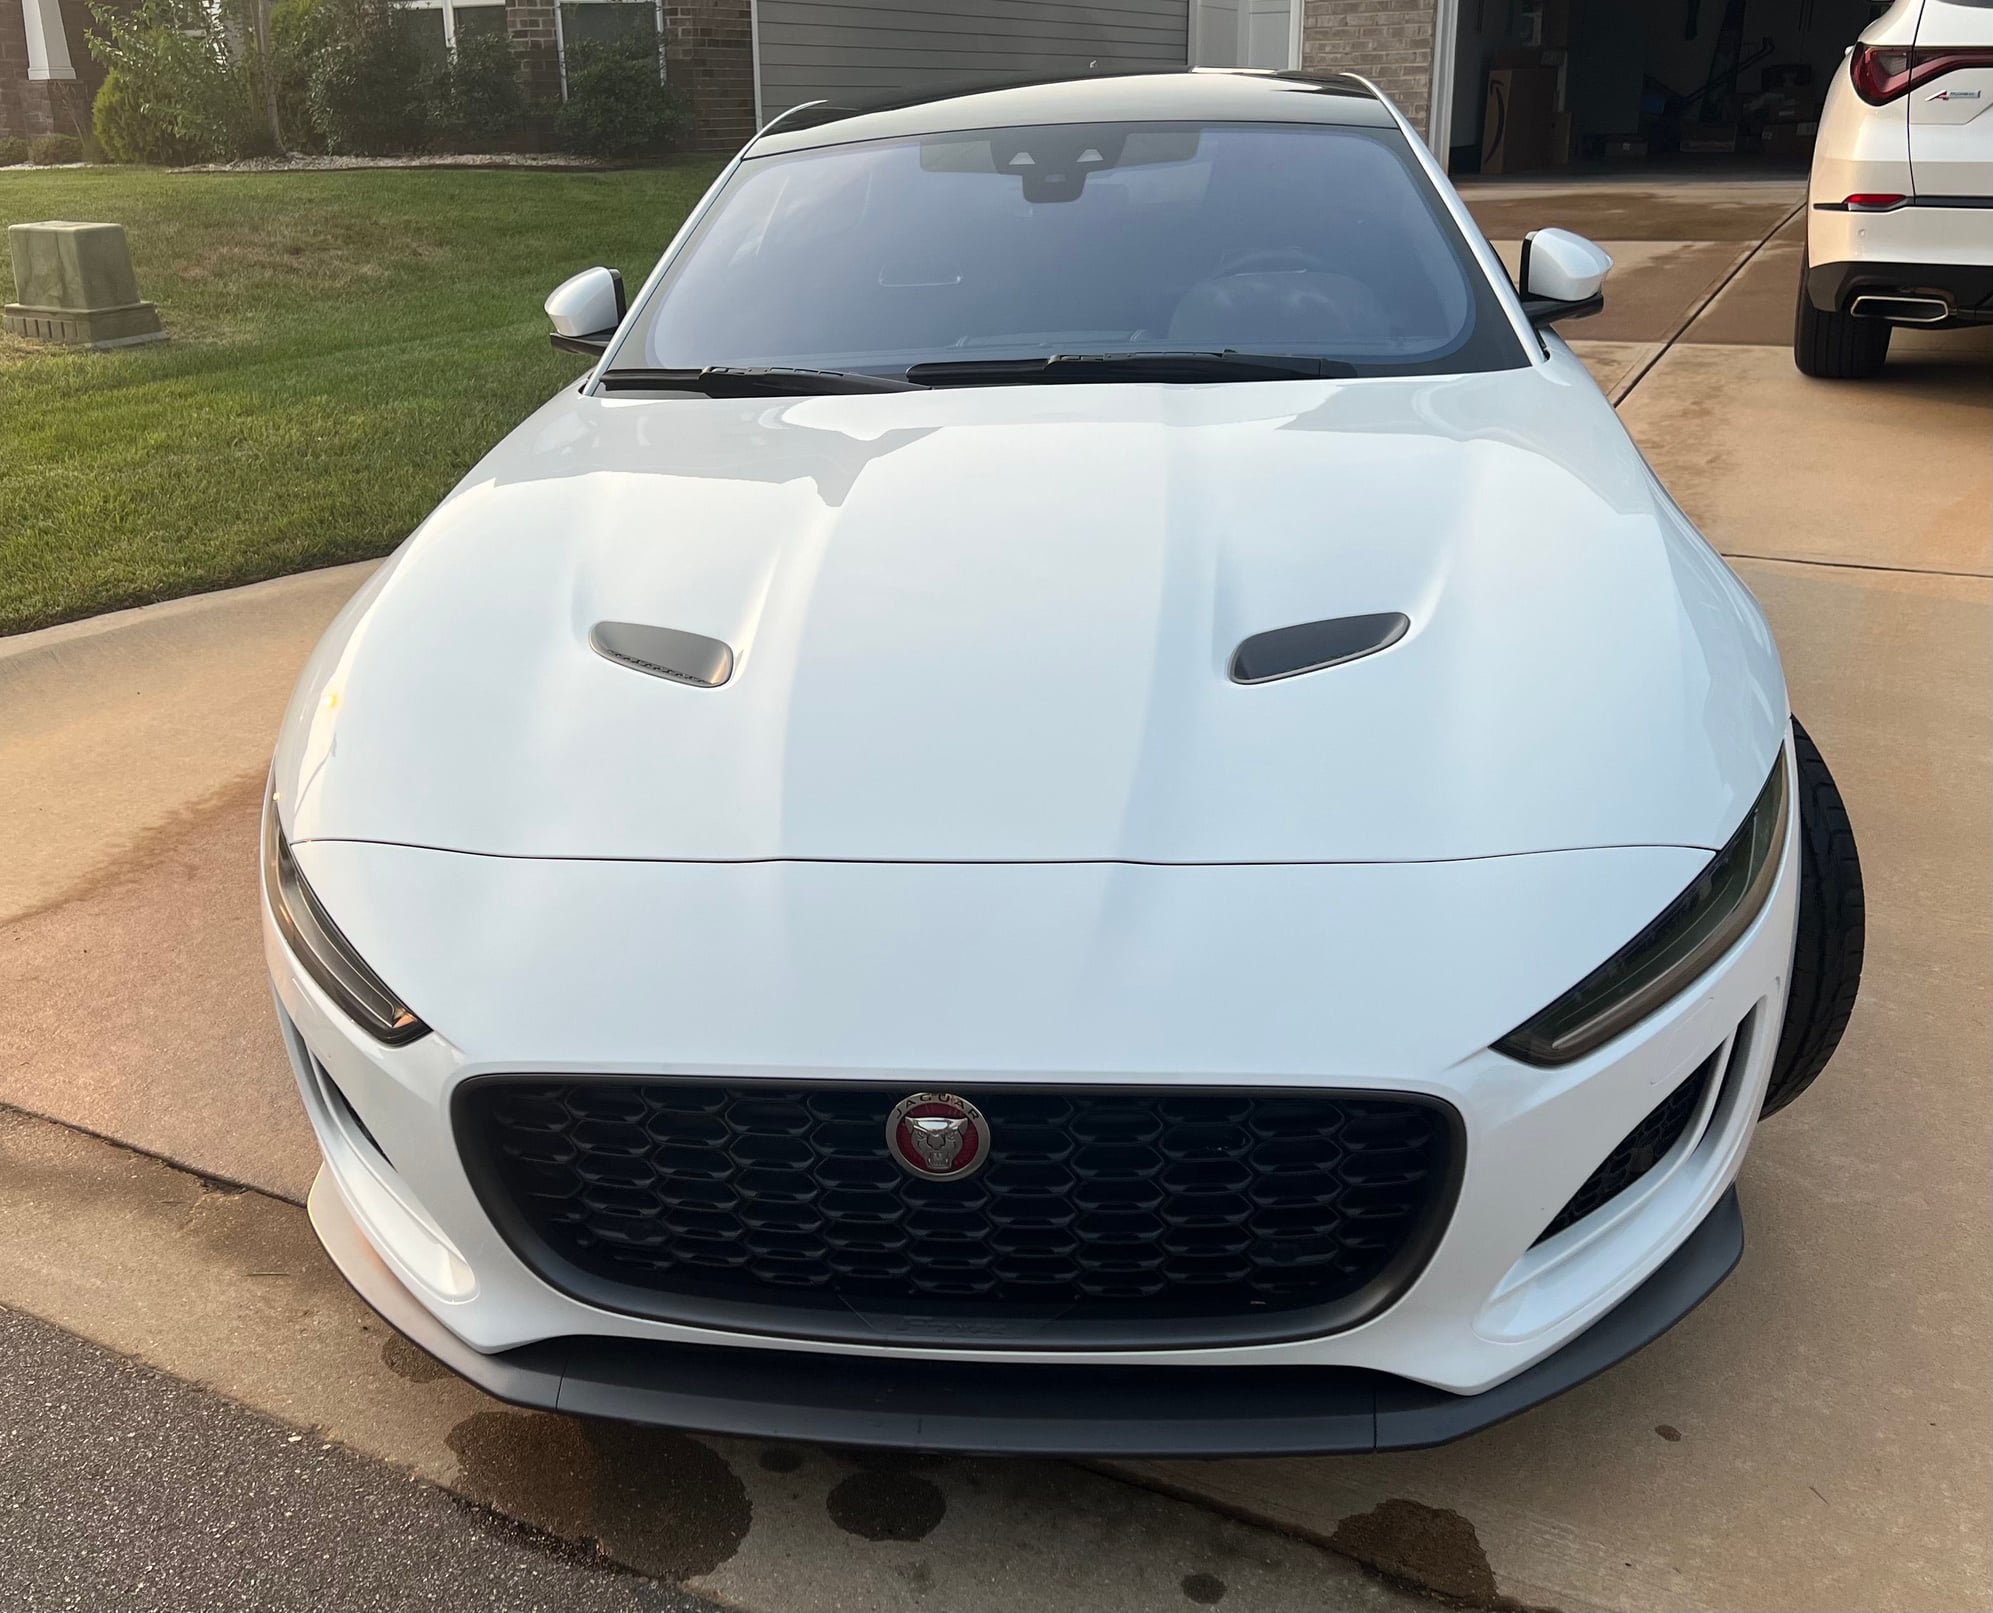 2021 Jaguar F-Type - 2021 F-Type P-300 Coupe, FIRST EDITION 4-Cyl, Turbo, 2.0 Liter 11,600 miles garaged! - Used - VIN SAJDF1GX2MC72743 - 4 cyl - 2WD - Automatic - Coupe - White - Greensboro, NC 27407, United States